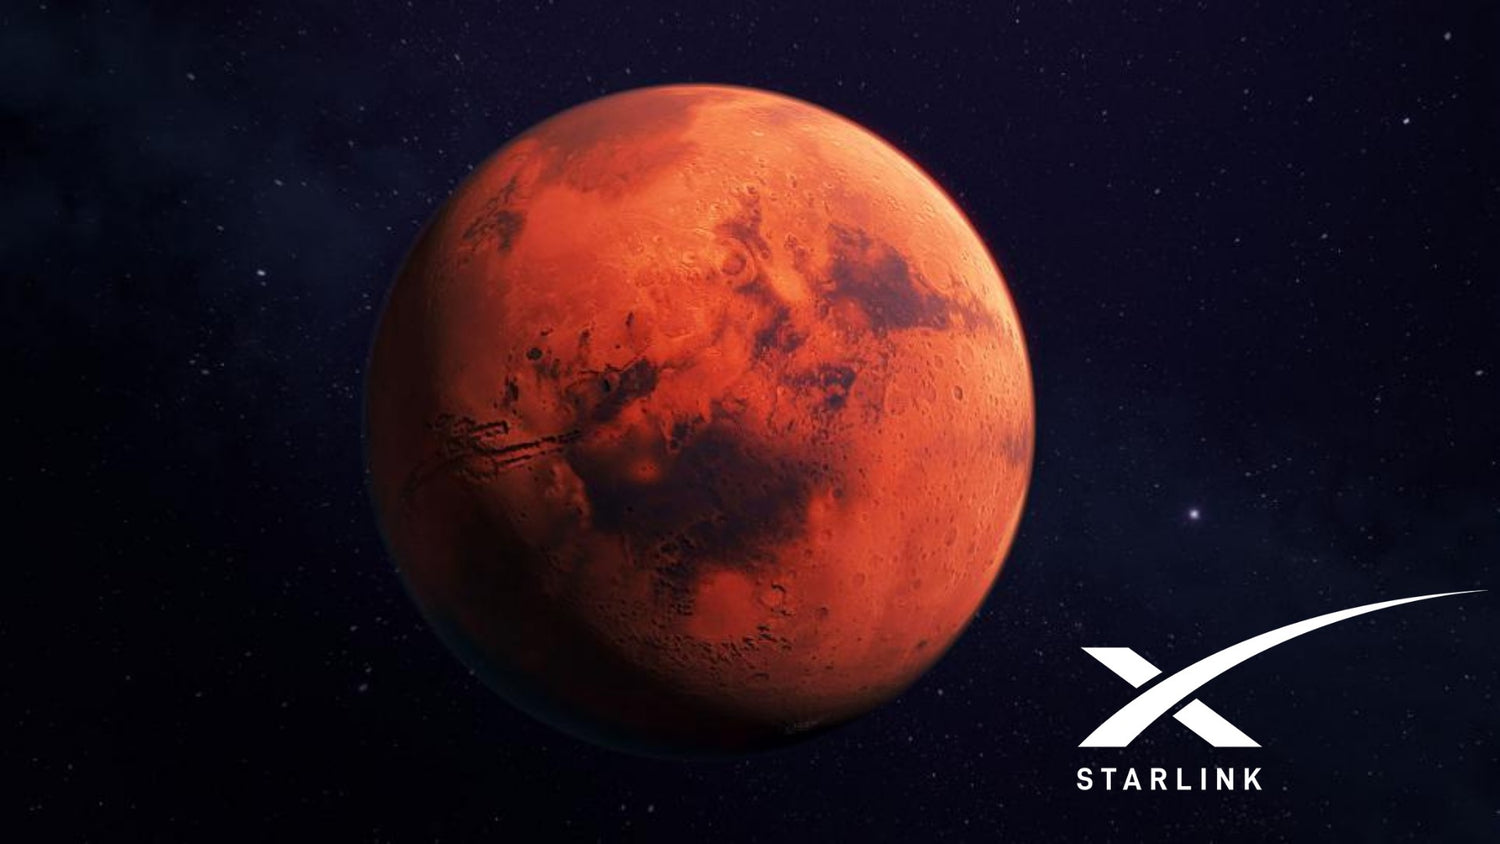 SpaceX plans to provide Starlink internet on Mars one day